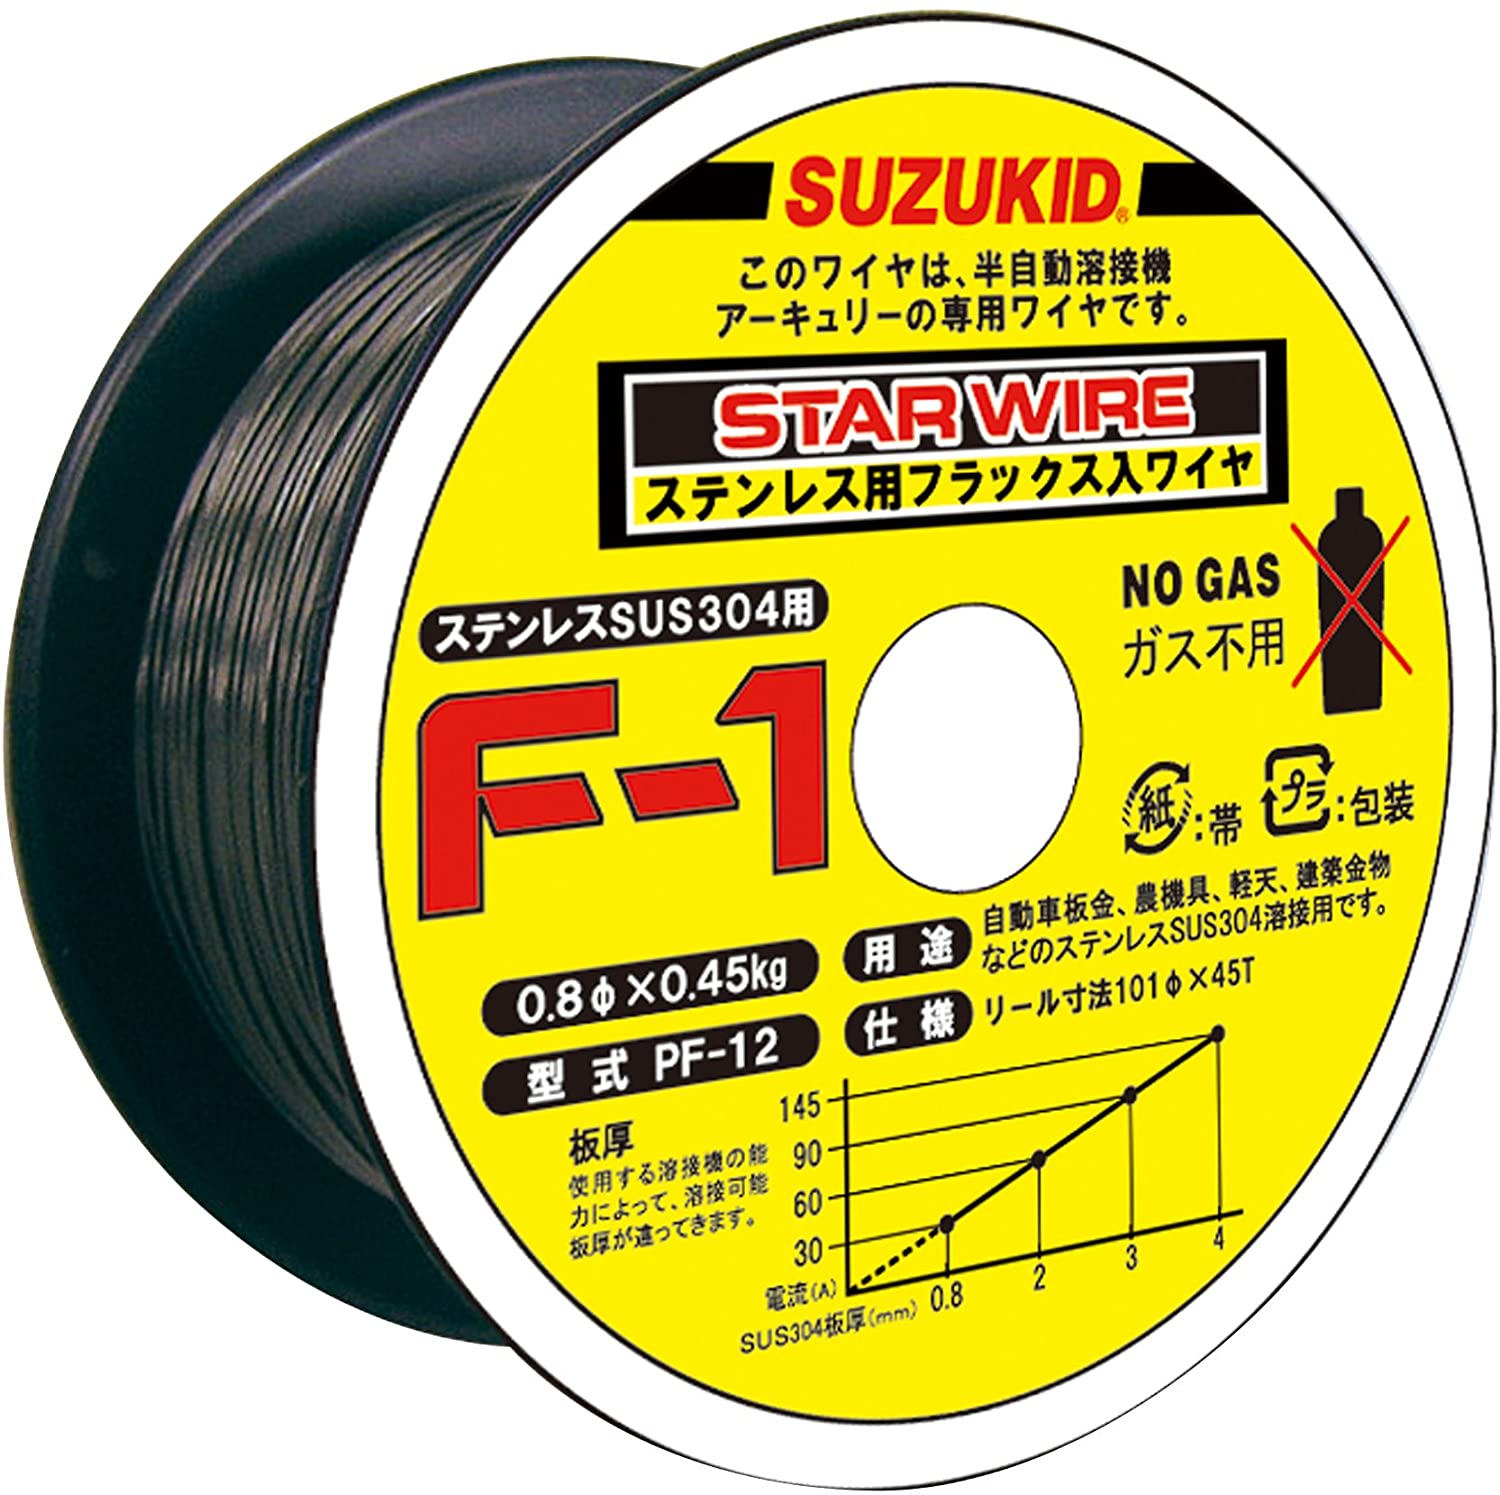 Star Wire, F-1, for Non-Gas Wire Stainless 0.8φ X 0.45 kg